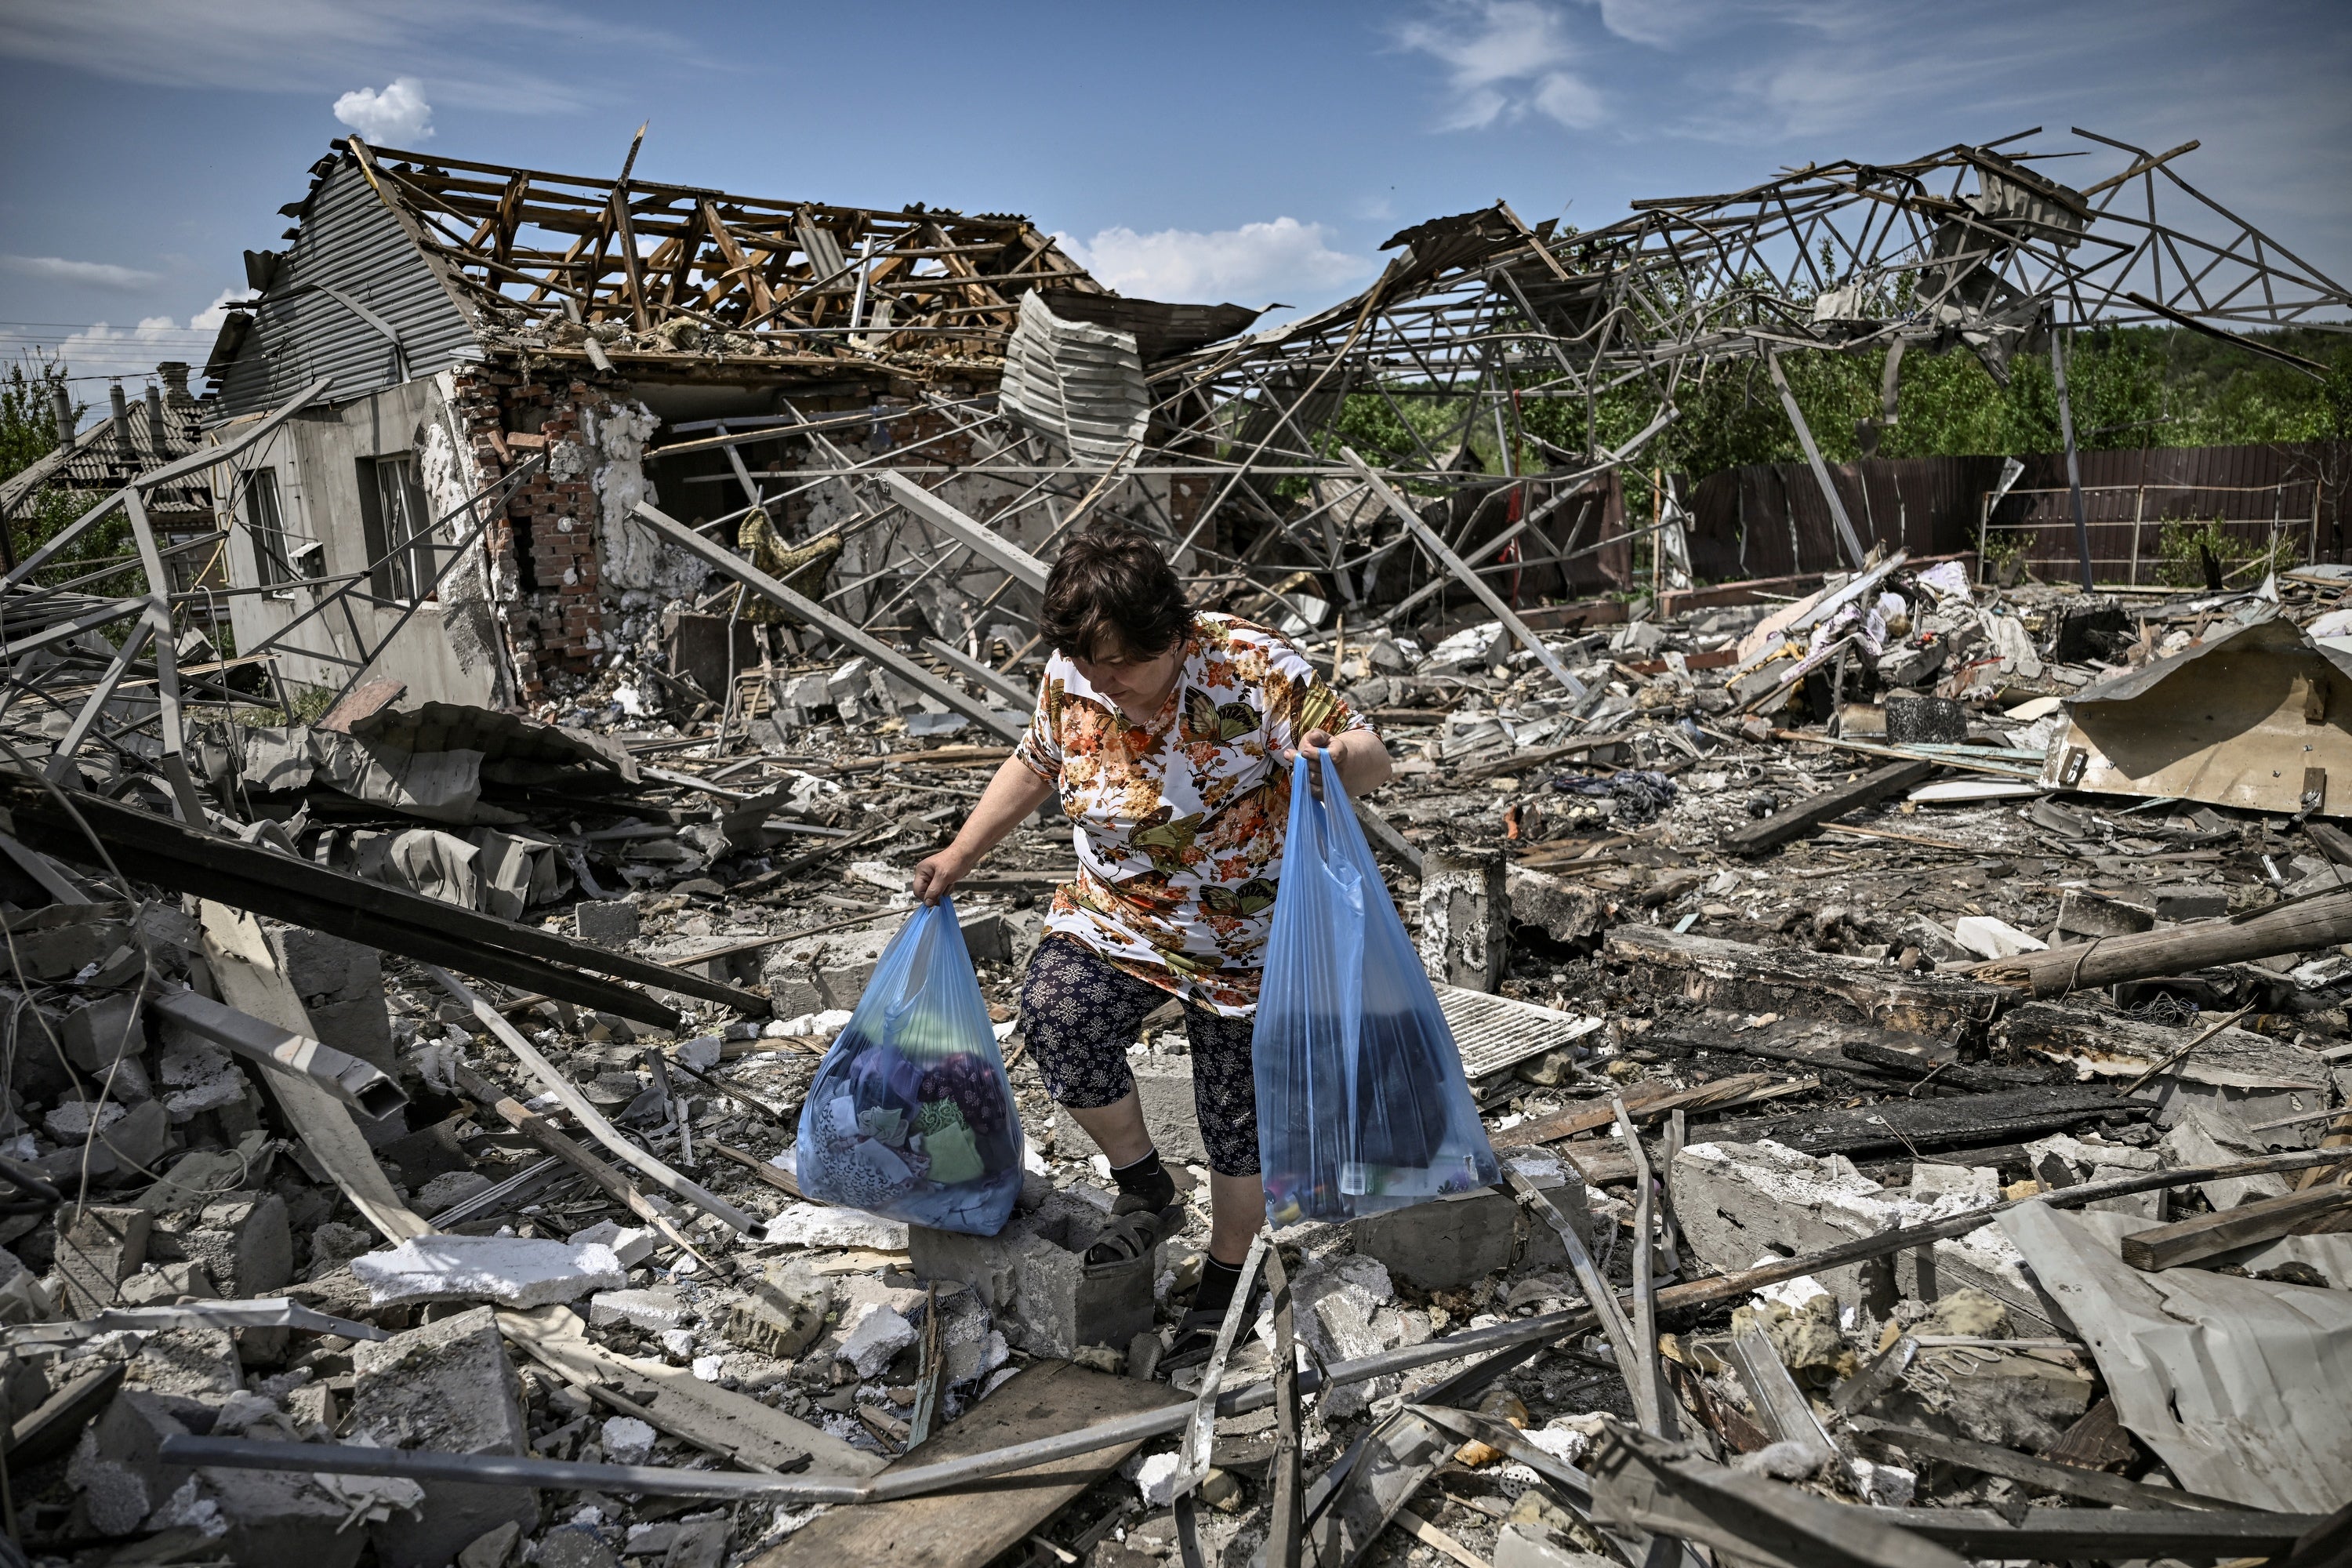 A woman collects belongings in the rubble of her house after a strike destroyed three houses in the city of Slovyansk, in the eastern Ukrainian region of Donbas, on 1 June 2022